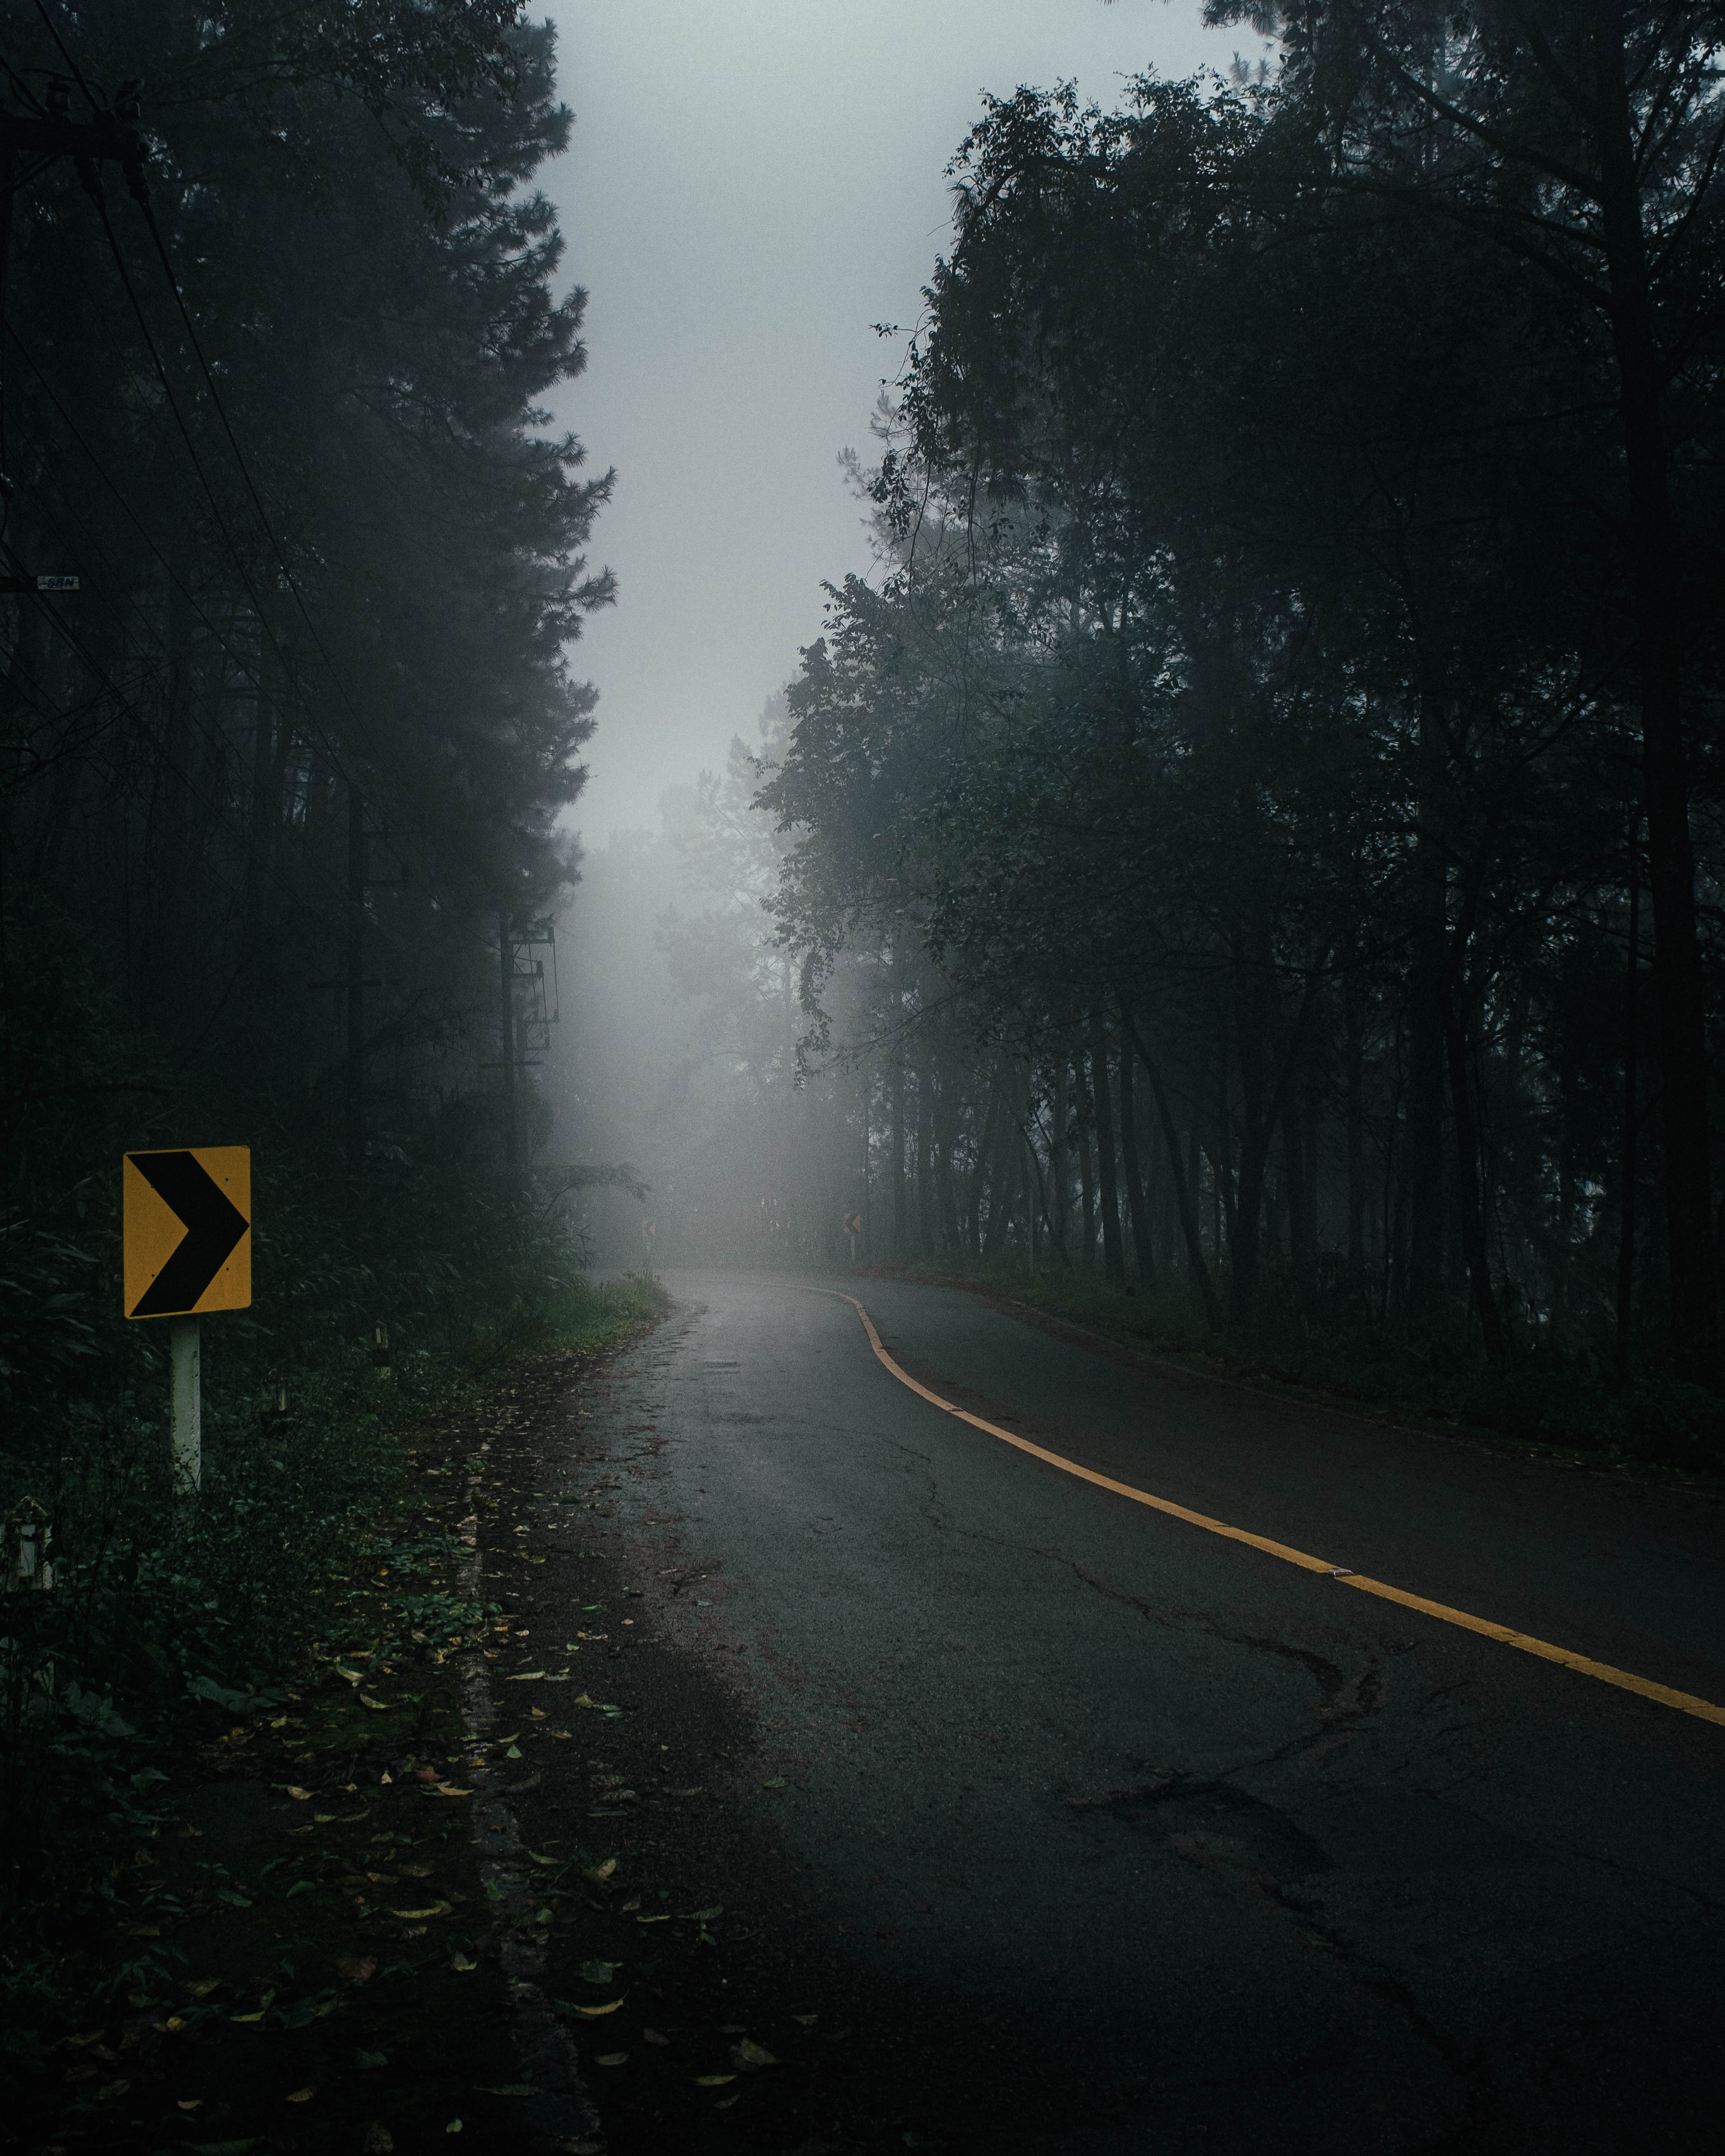 trees, darkness, road, fog, nature wallpaper for mobile